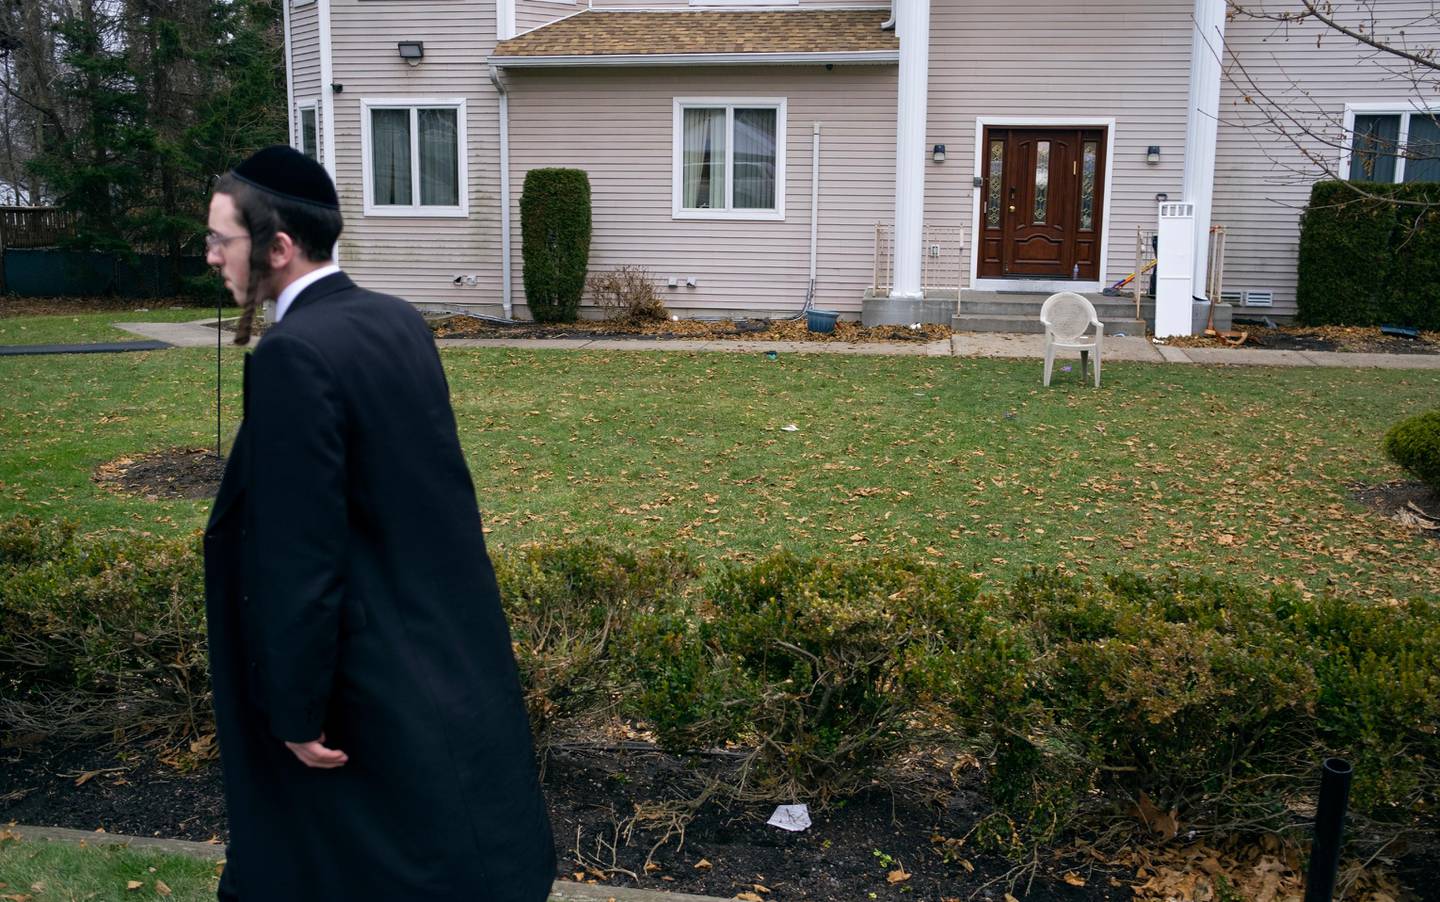 A man walks near a rabbi's residence in Monsey, N.Y., Sunday, Dec. 29, 2019. A day earlier, a knife-wielding man stormed into the home and stabbed multiple people as they celebrated Hanukkah in the Orthodox Jewish community. (AP Photo/Craig Ruttle)